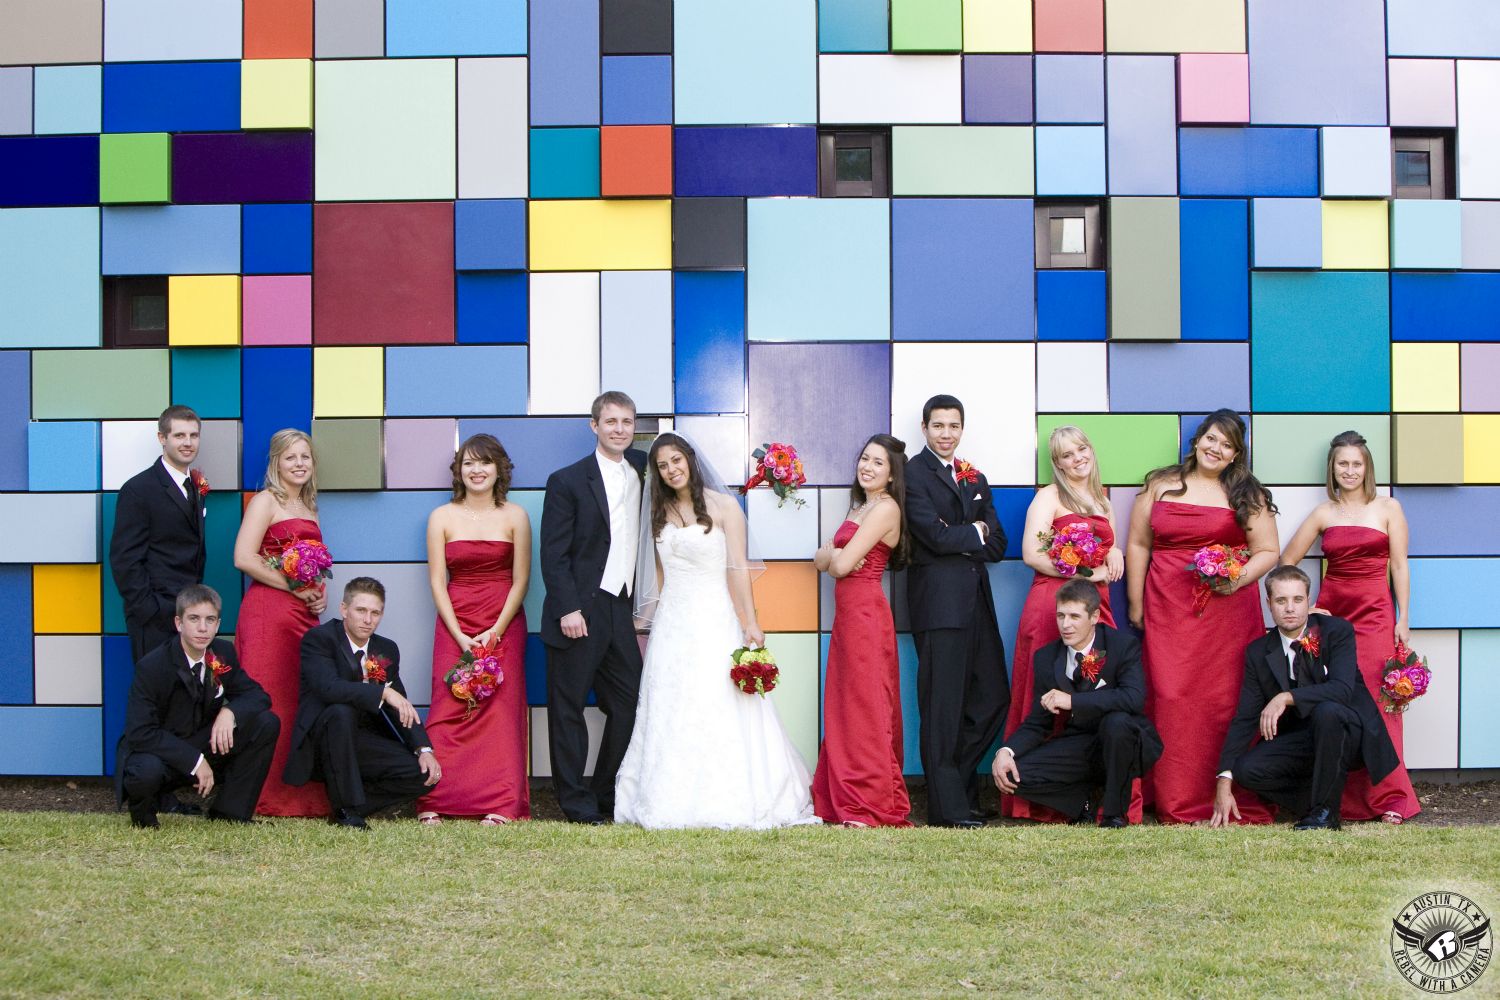 Bridal party with bridesmaids in strapless red full length dresses and orange and pink bouquets stand in front of bright and colorful mosiac wall at Discovery Green Park in Houston, Texas, during the wedding.